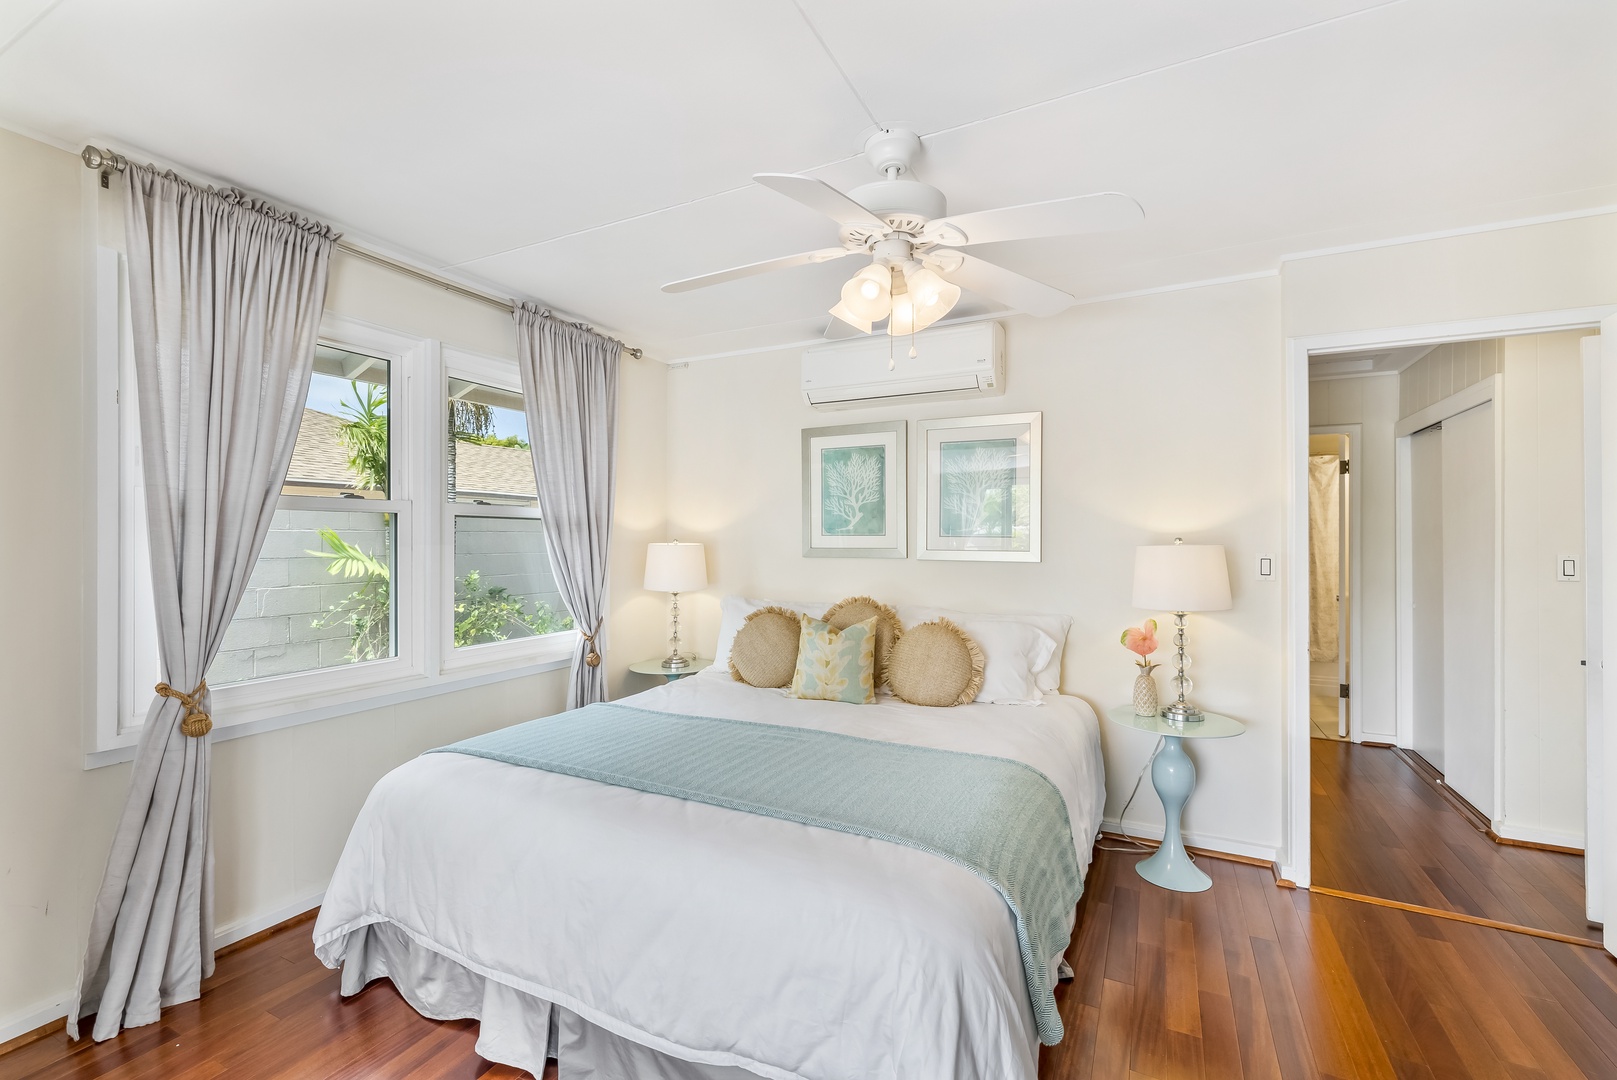 Honolulu Vacation Rentals, Kahala Cottage - Get nice and cool with your own air conditioning in the primary.